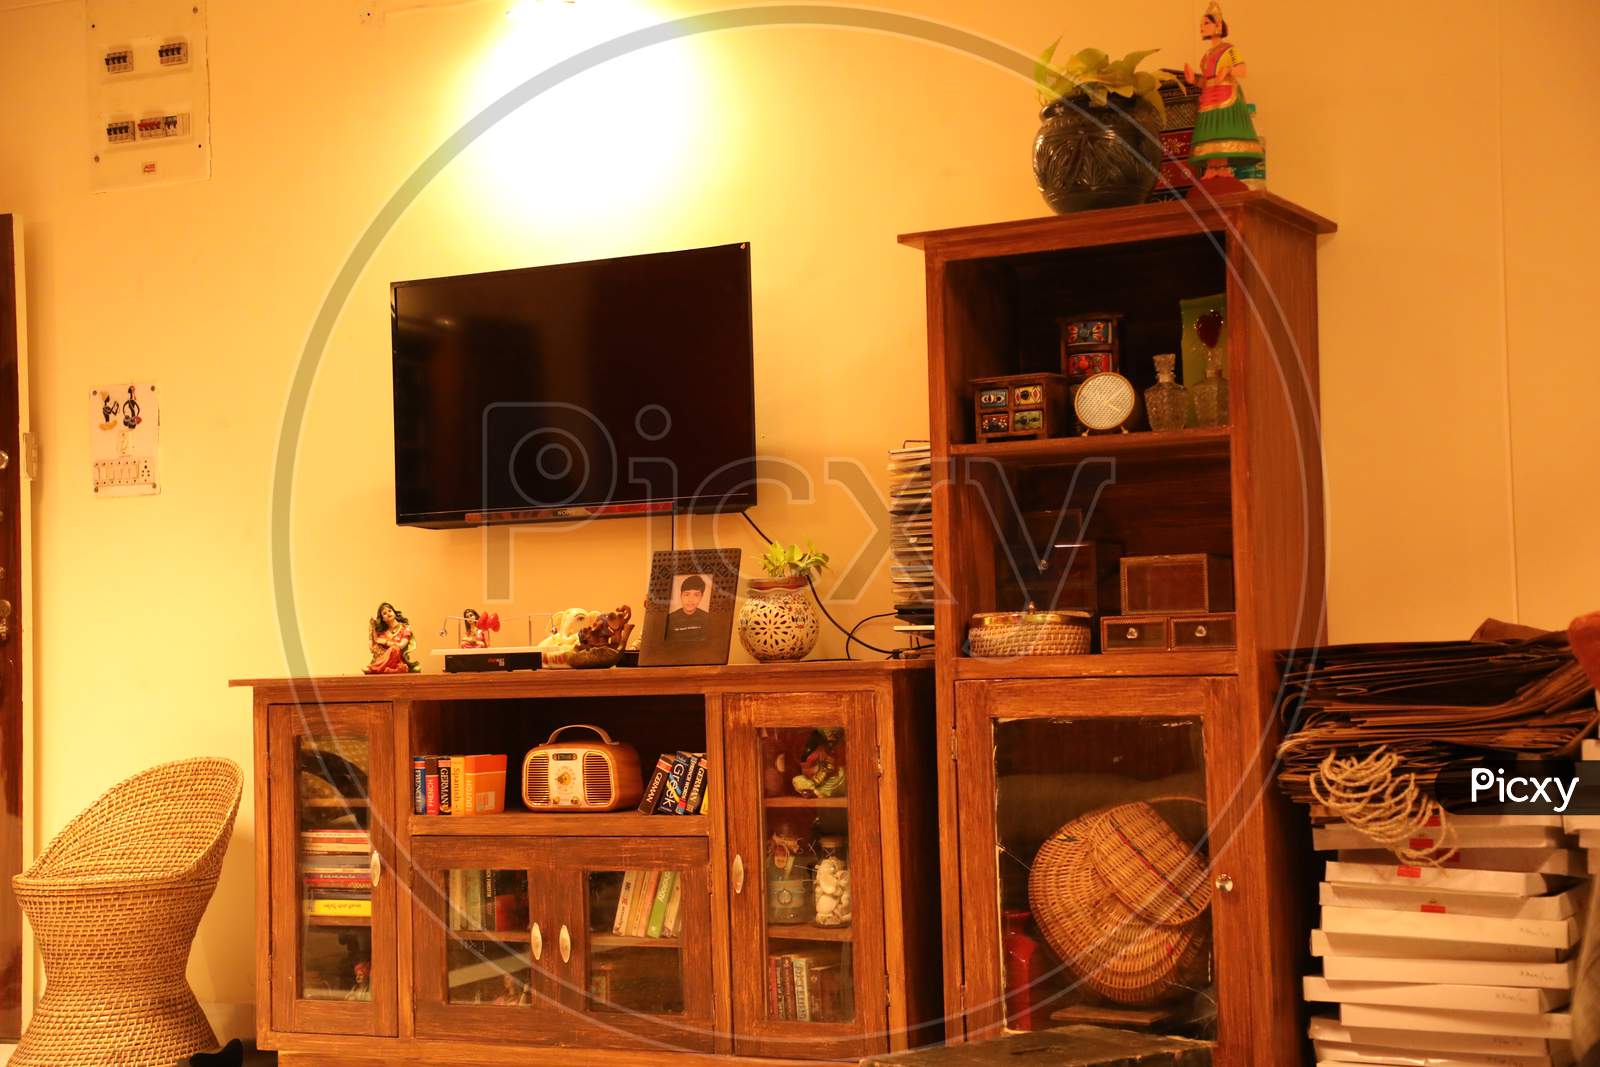 Interior Of a House With TV And Wooden Cupboard